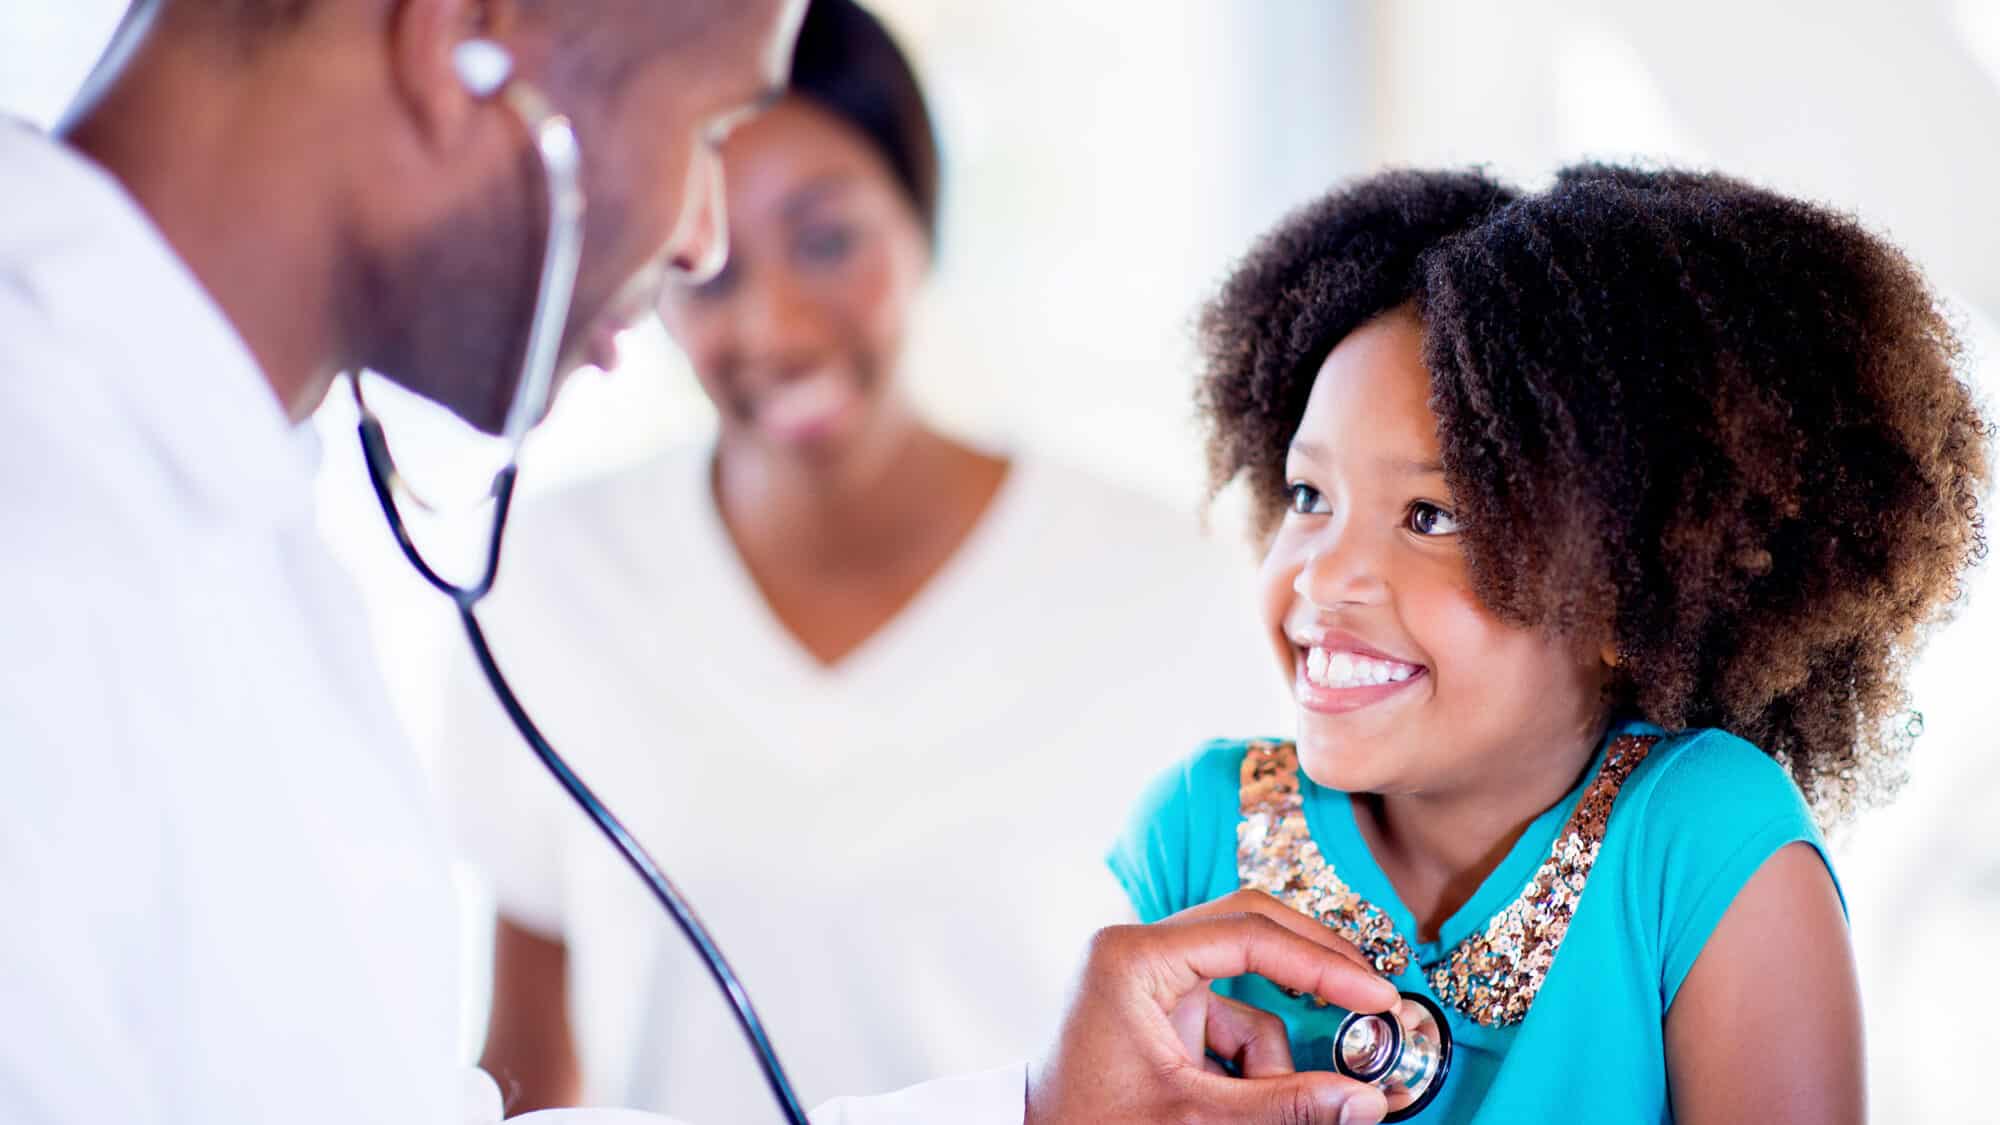 Baltimore Medical System provides quality care regardless of the patient's ability to pay